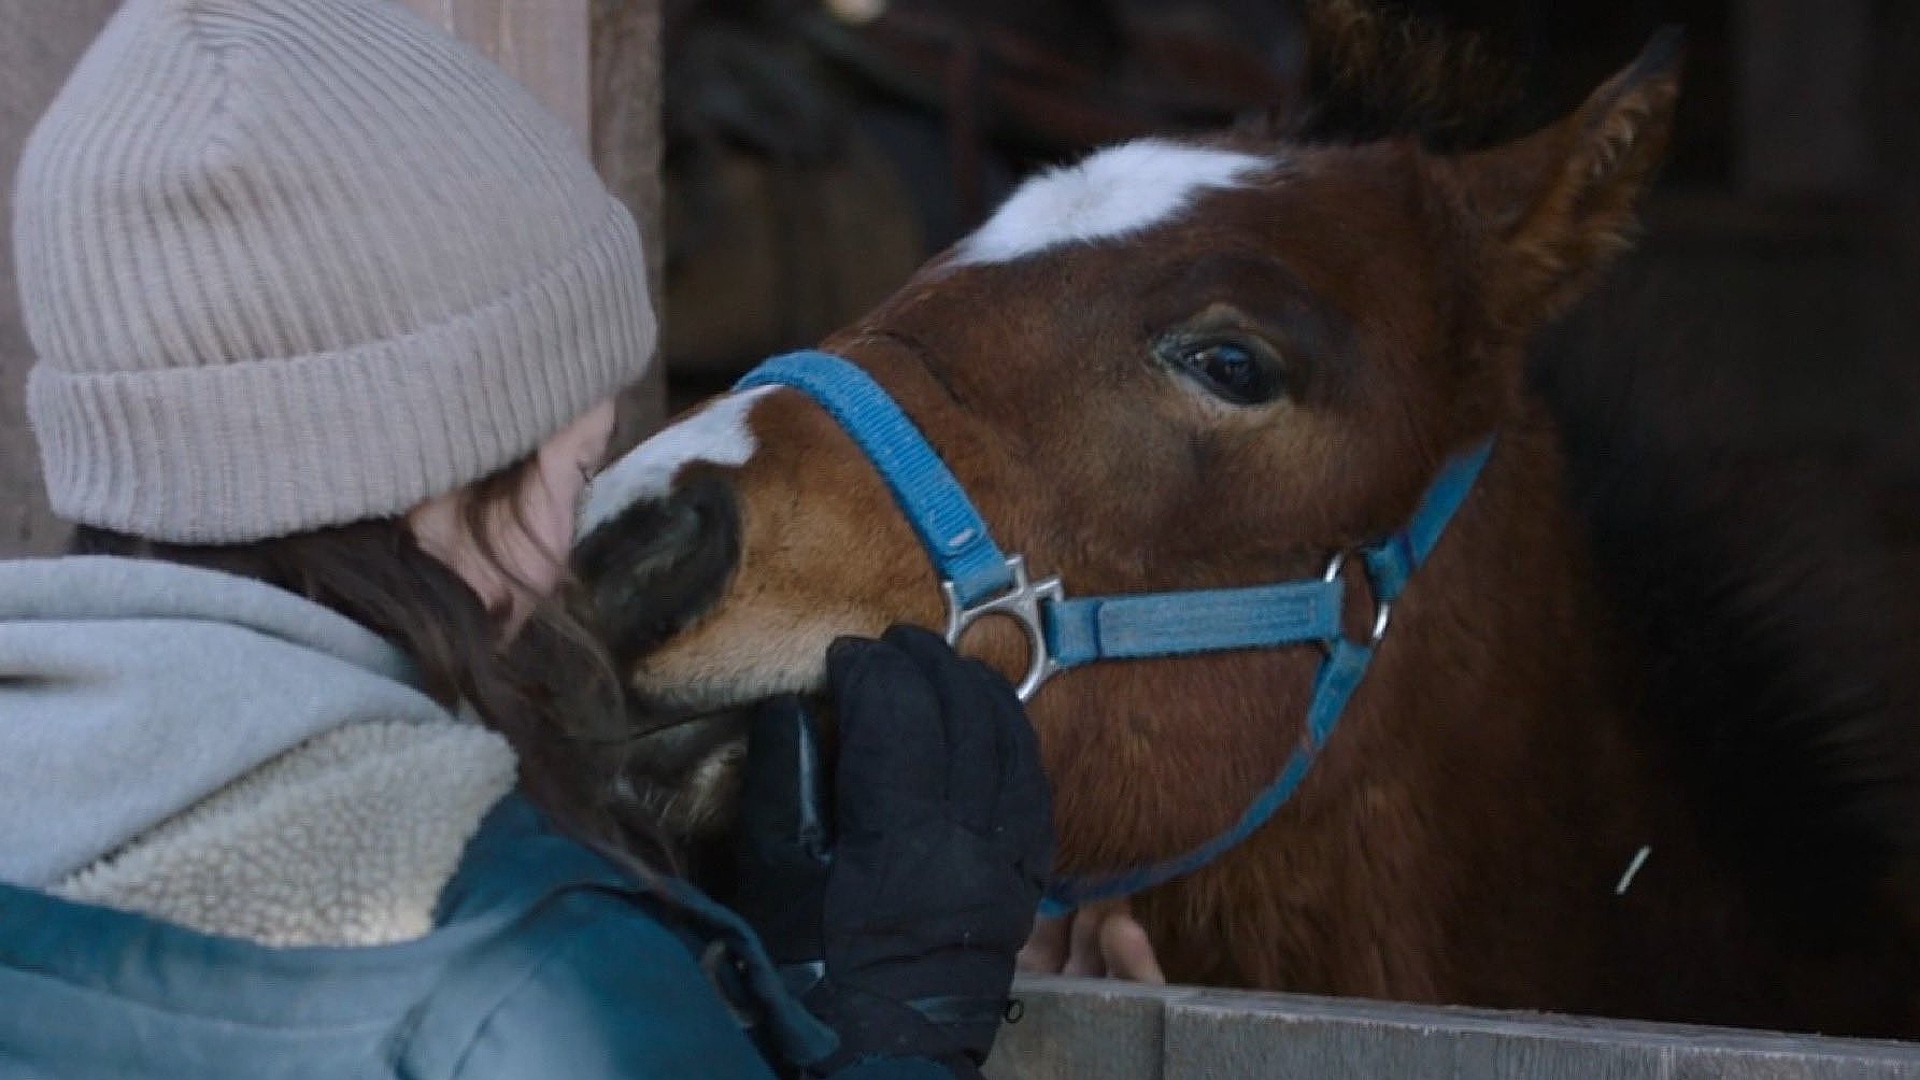 The Last of Us episode 6 just introduced Ellie's horse companion